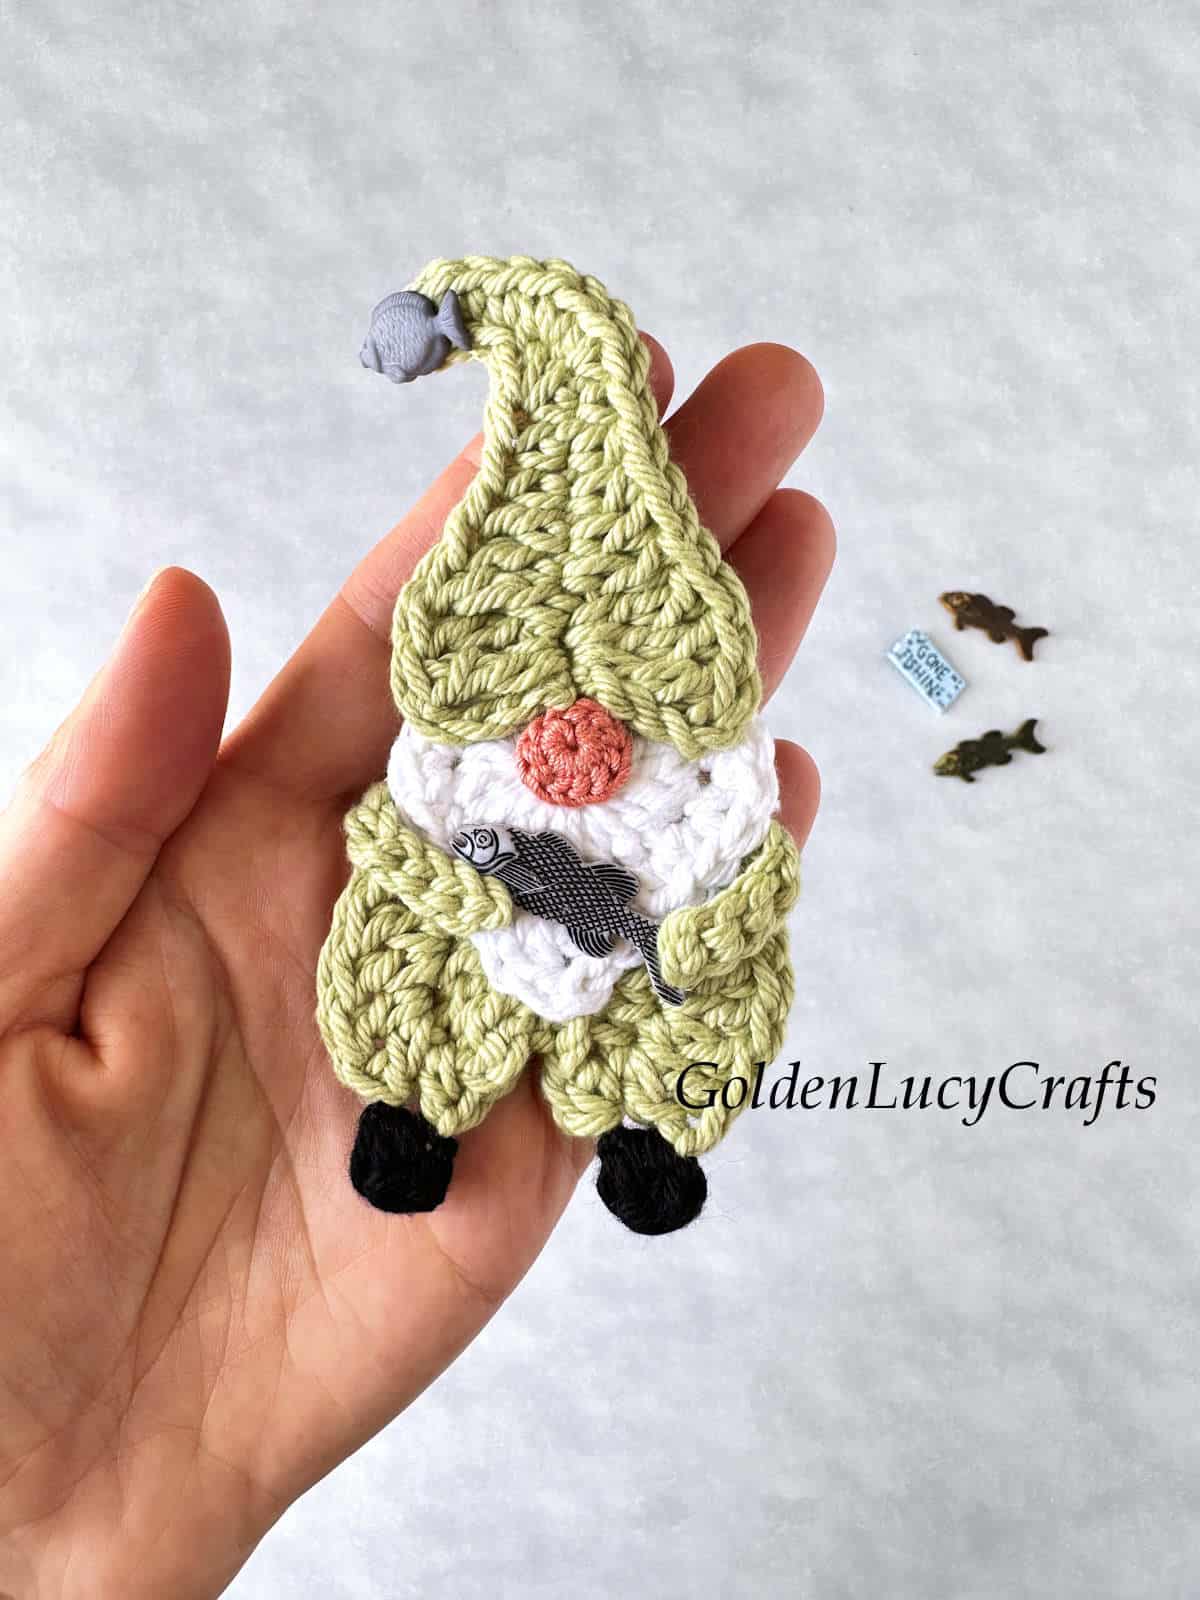 Crochet gnome holding fish in his hands.